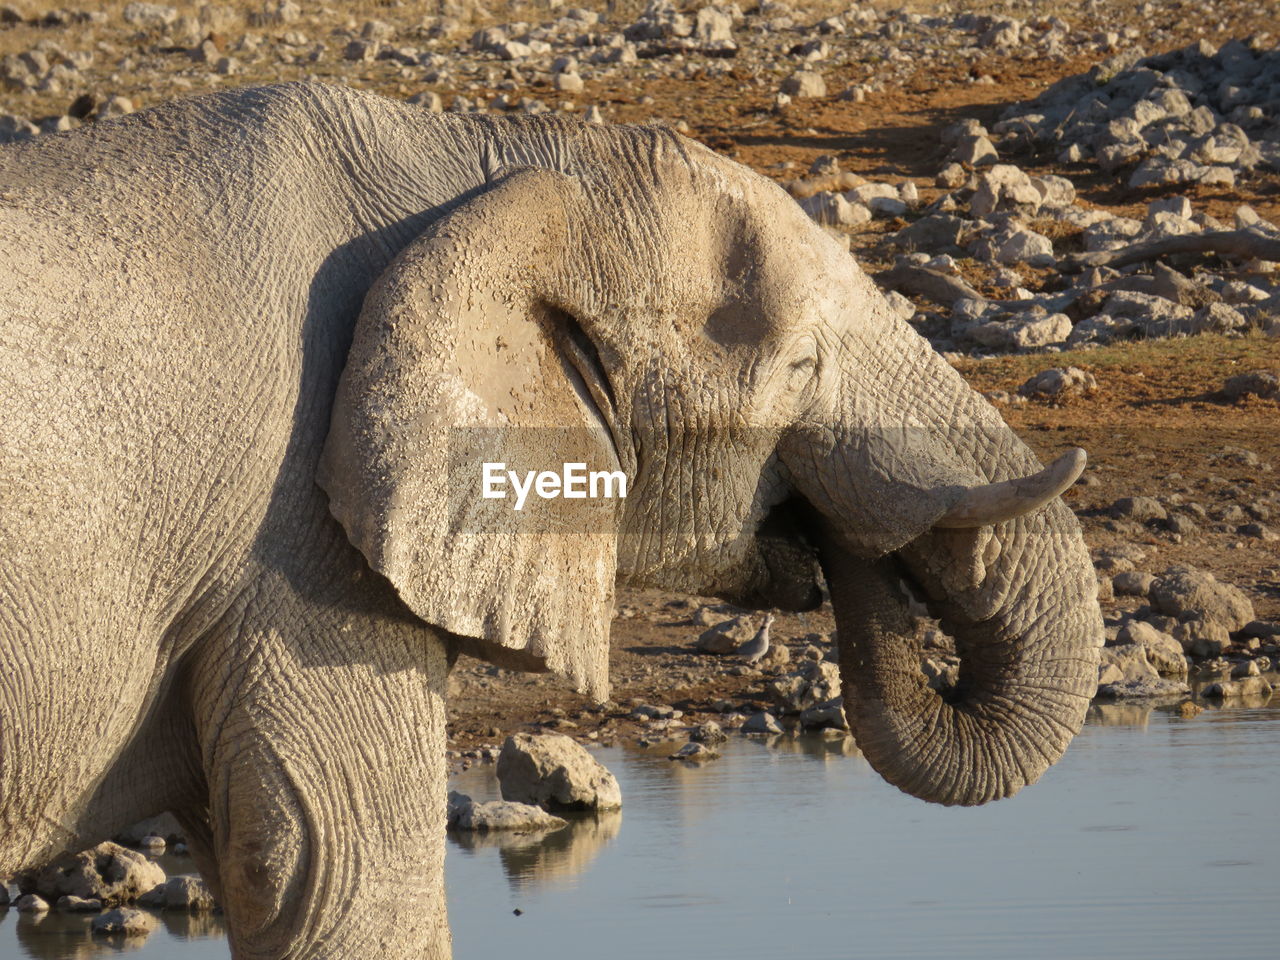 VIEW OF ELEPHANT DRINKING WATER